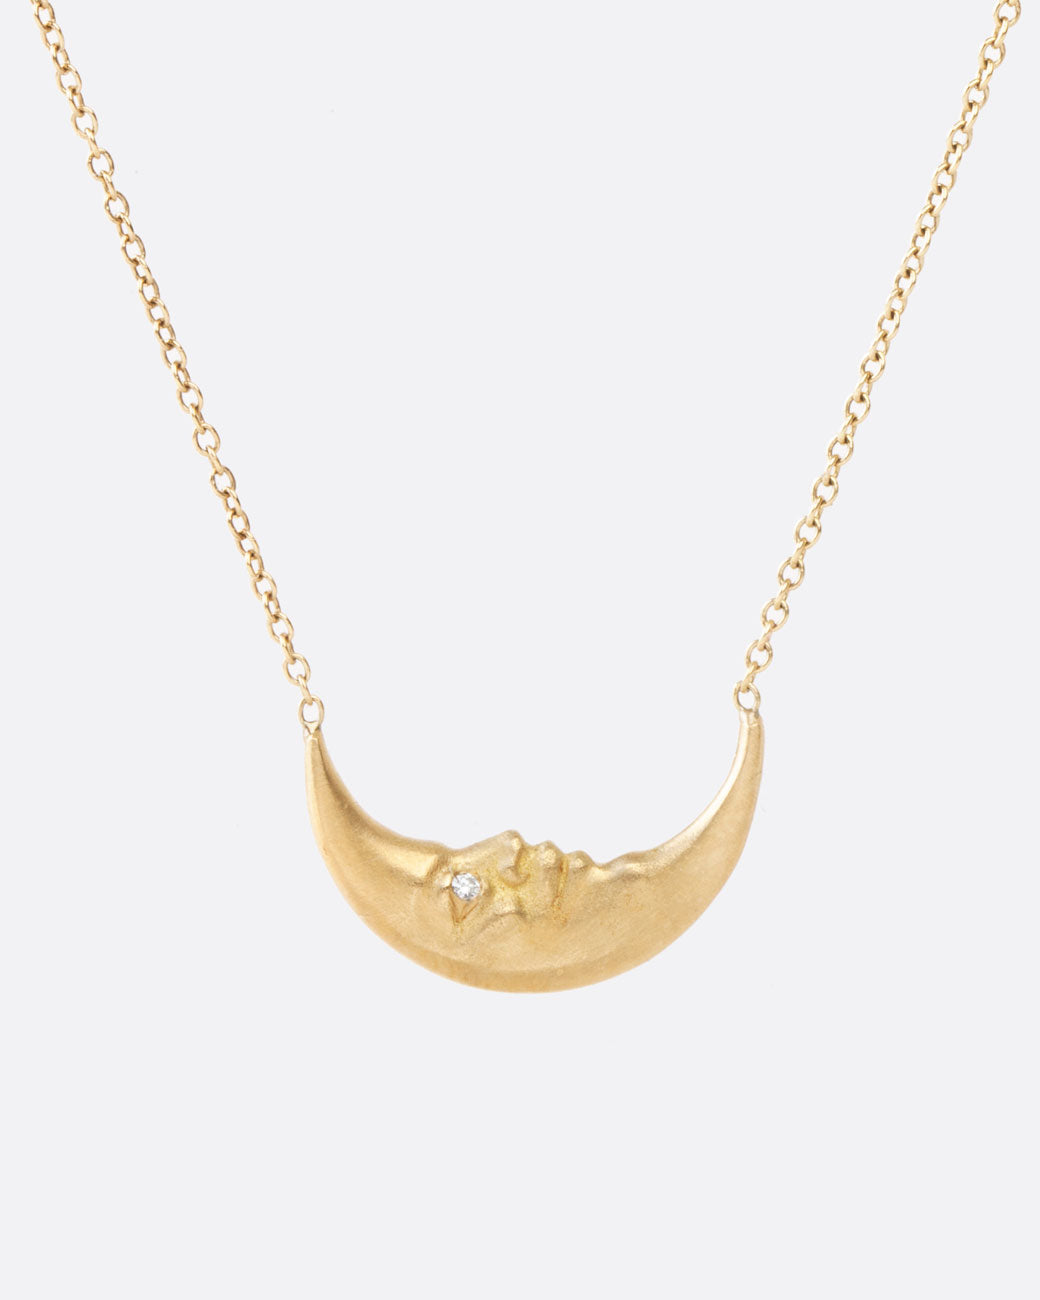 Super close up view of a tiny yellow gold crescent moon, with a face carved into it and little diamond eyes, is a unique pendant. Double sided and hanging from a chain. The chain is attached to the ends of the crescent, so it falls on a sideways/horizontal angle across the chest.